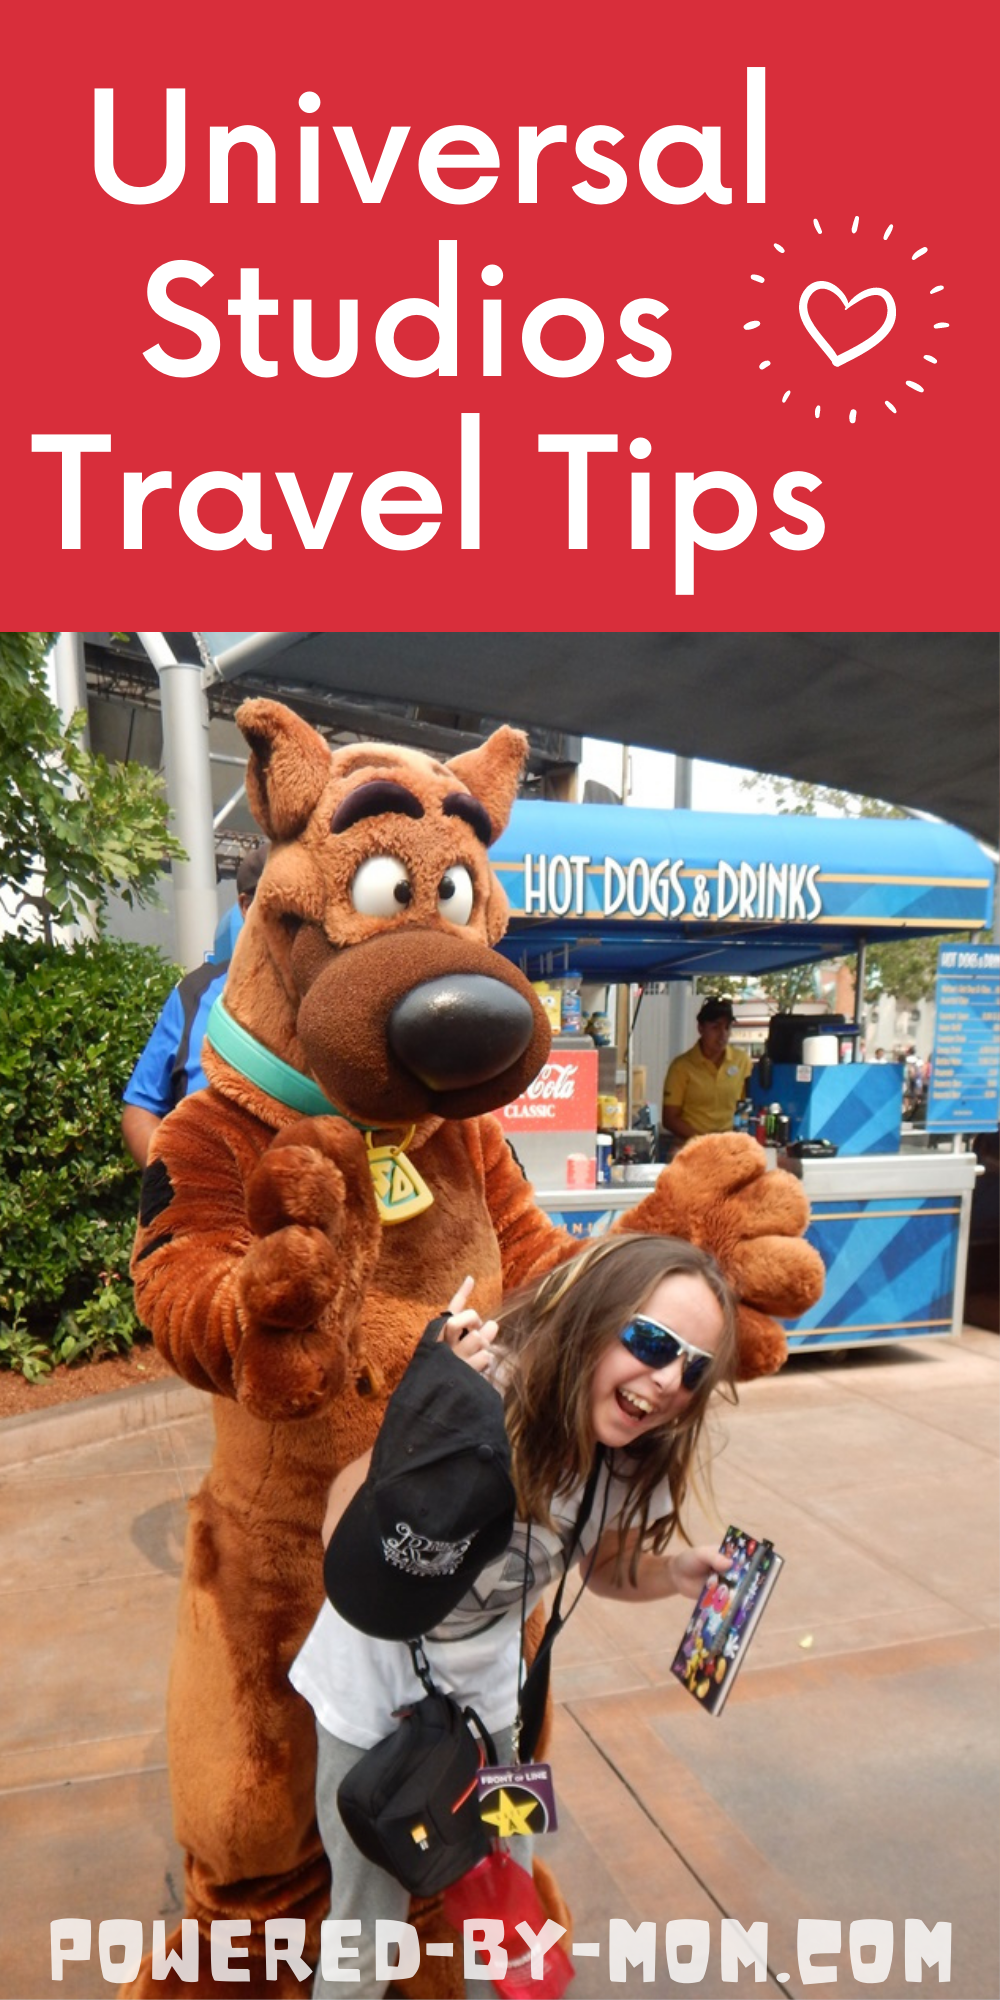 Planning a trip to Universal Studios California or in Florida? Make sure to check out our Universal Studios travel tips!